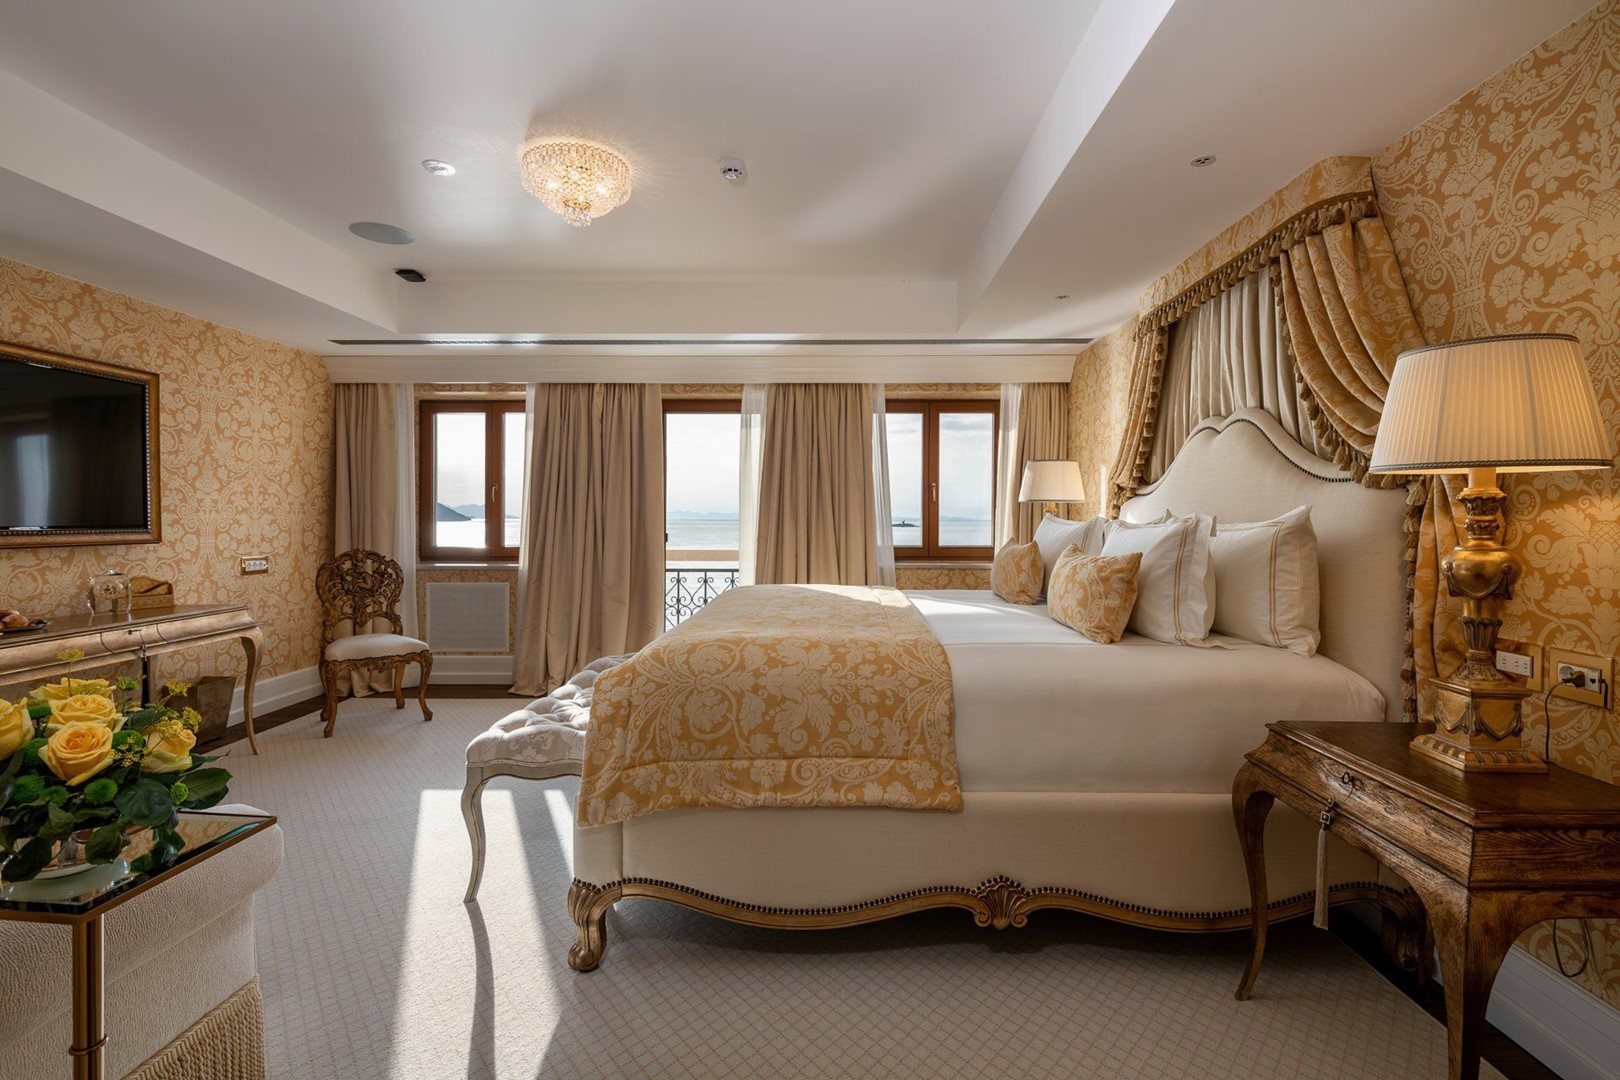 King size bed in a bedroom of a luxury family suite Korta Katarina 302 for vacation on Peljesac island